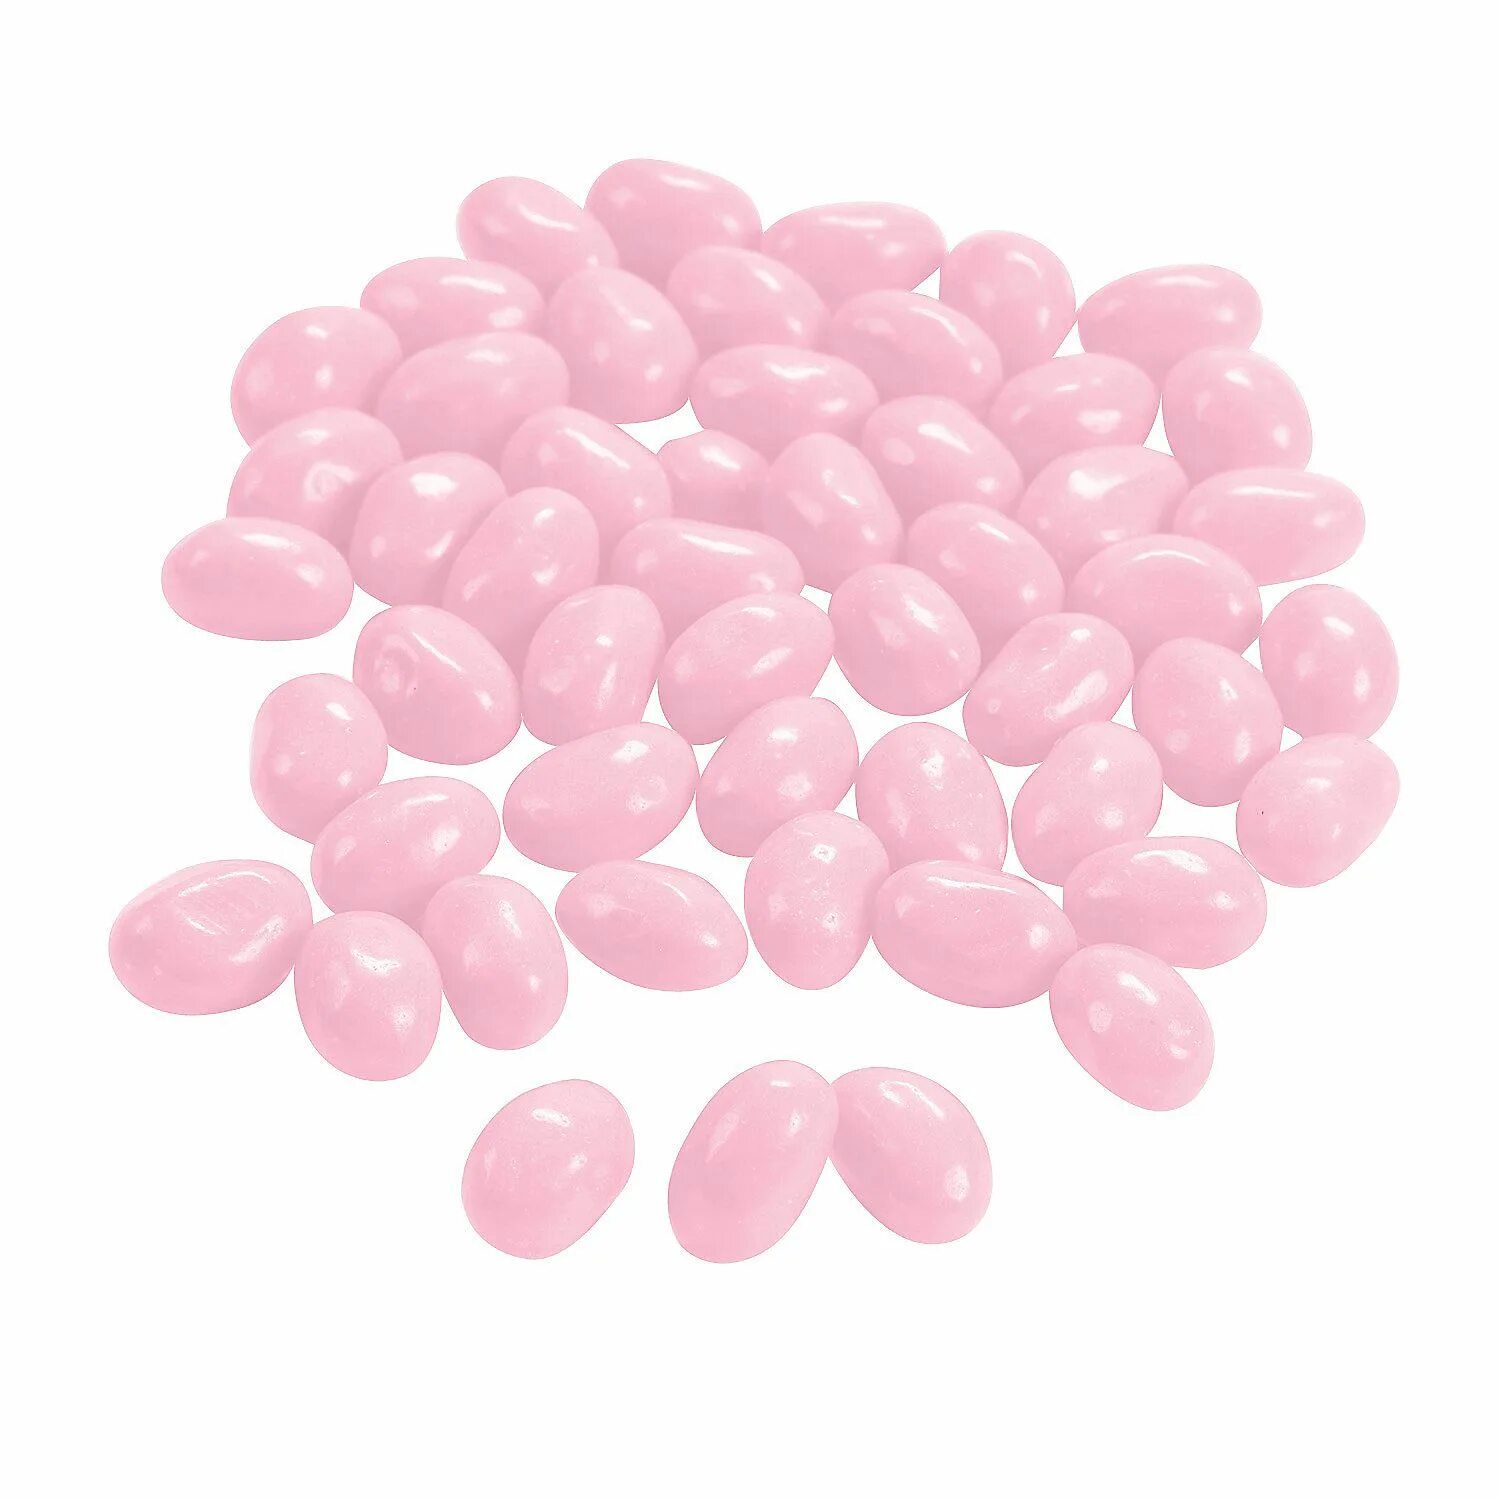 Pink jelly. Jelly Pink. Розовый Боб. Jelly Beans Pink. Jelly Pink Switches.